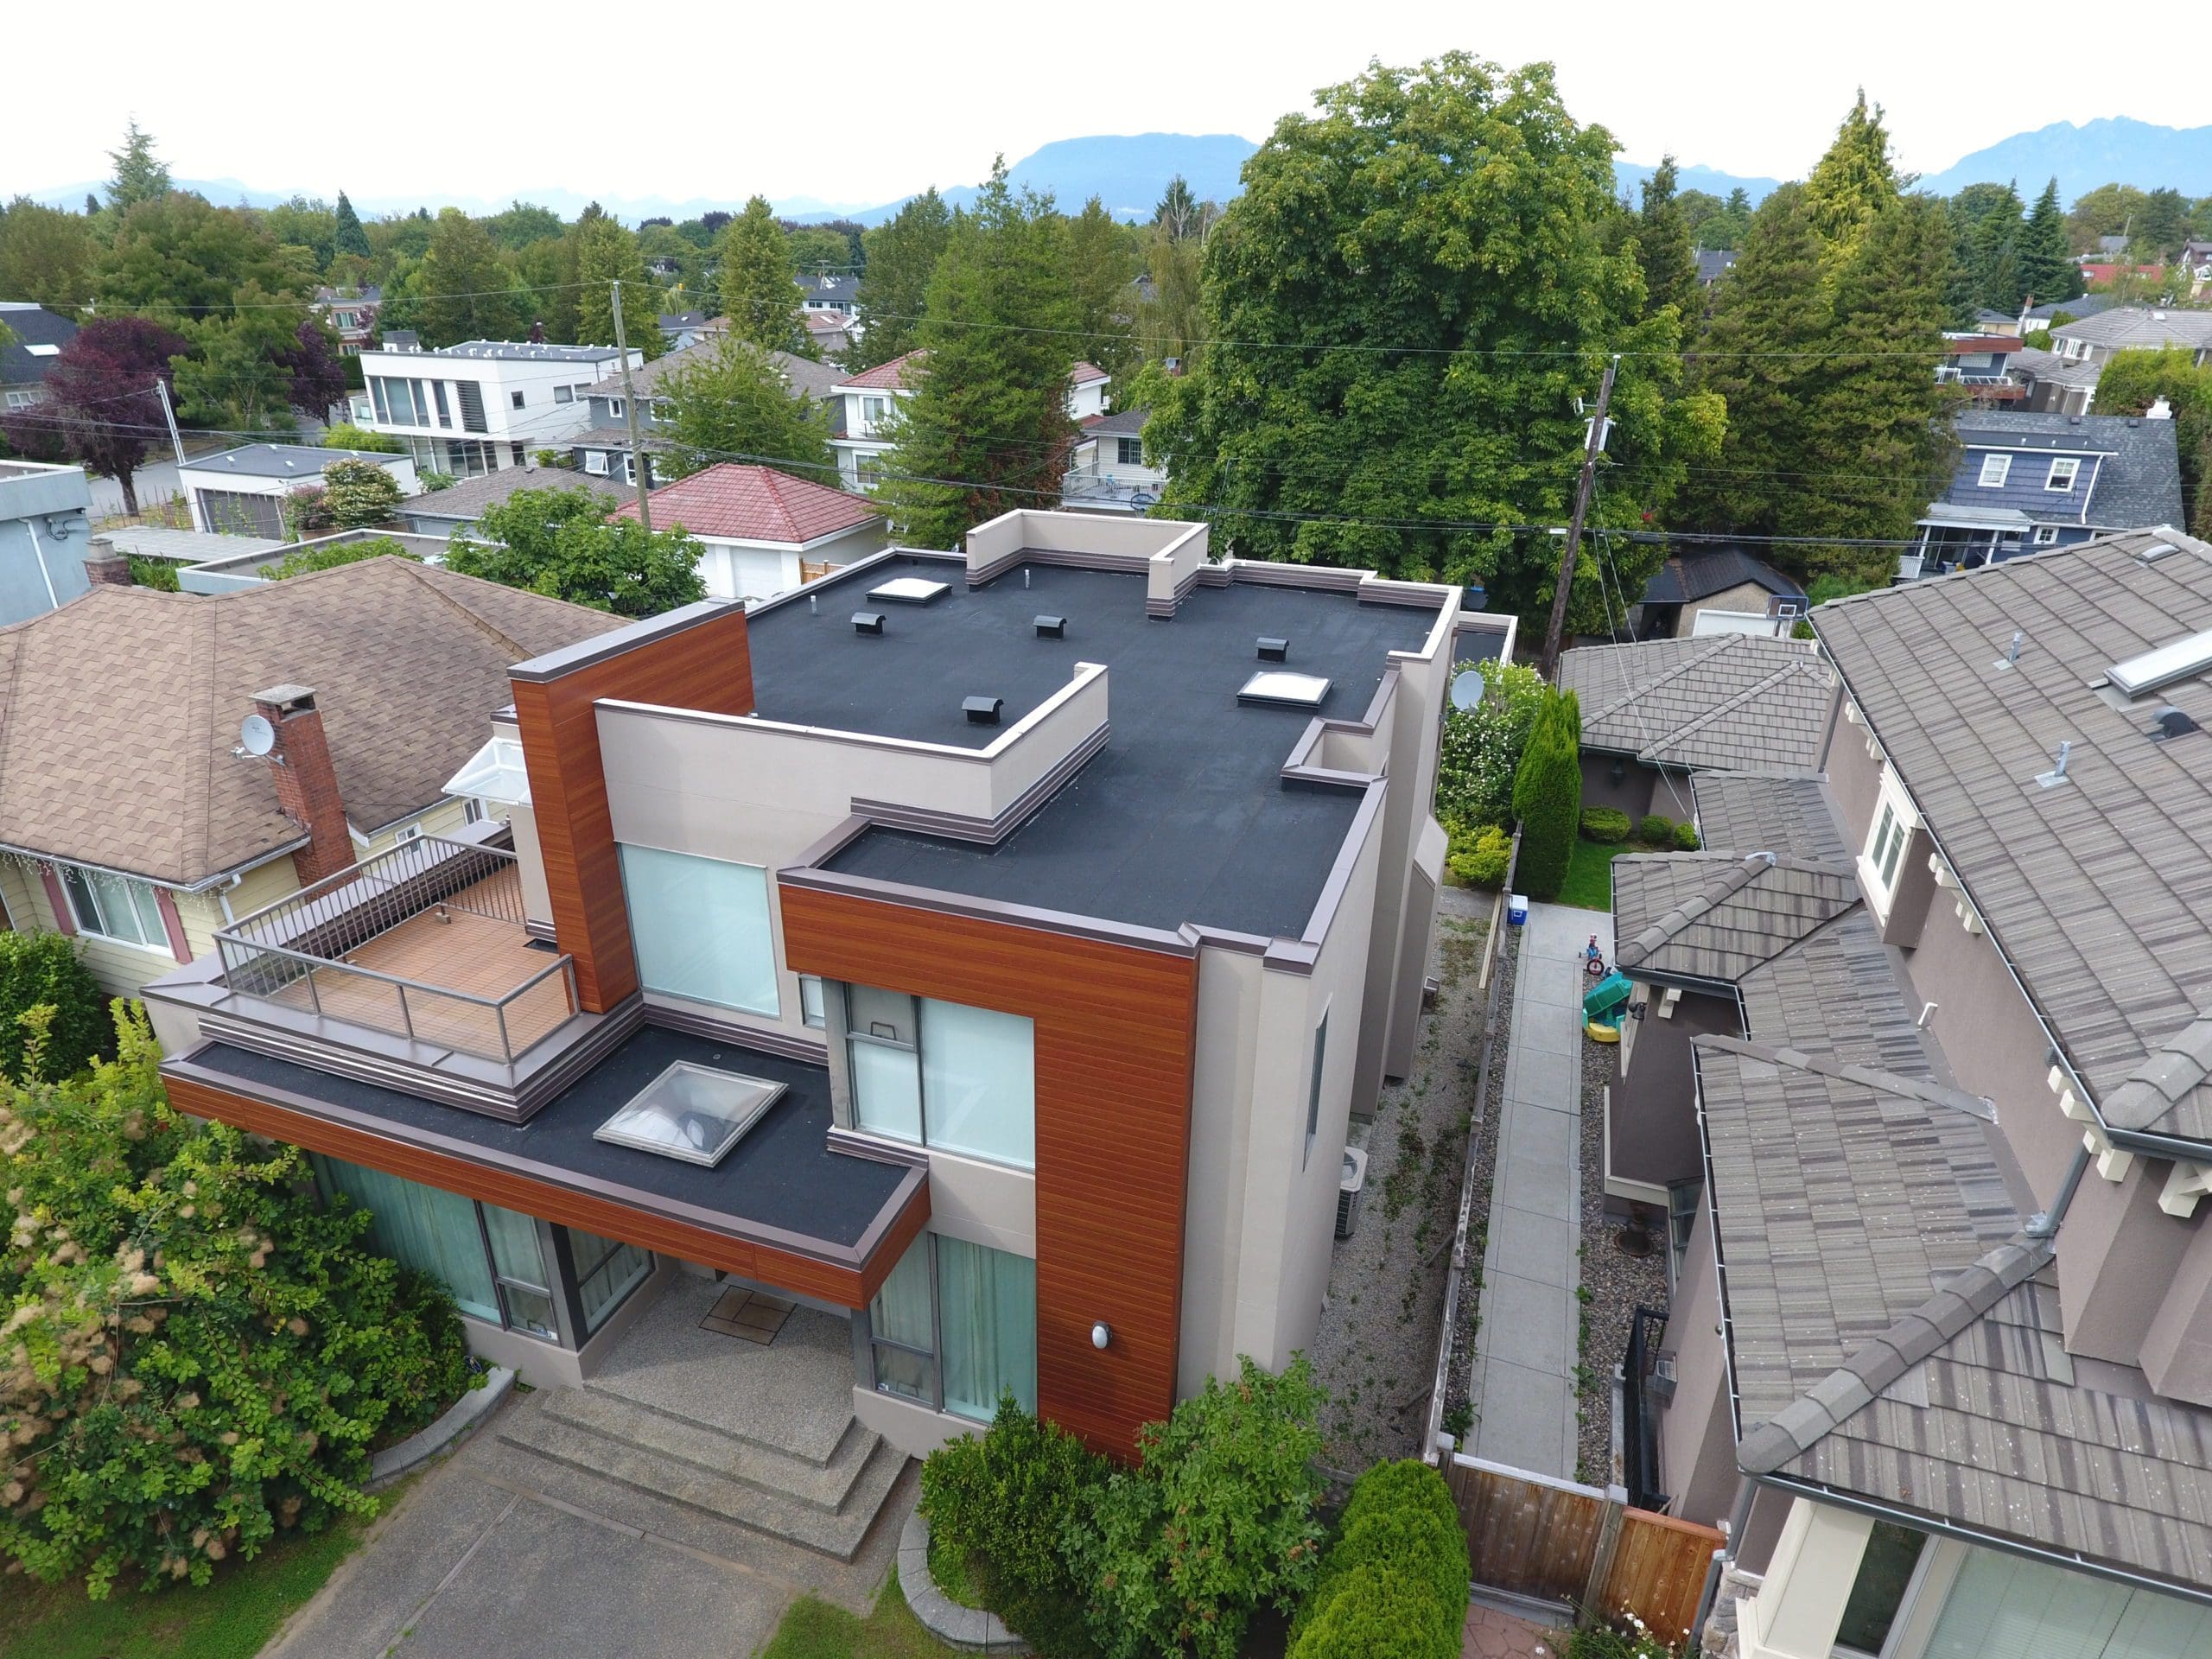 Flat Roof Vancouver